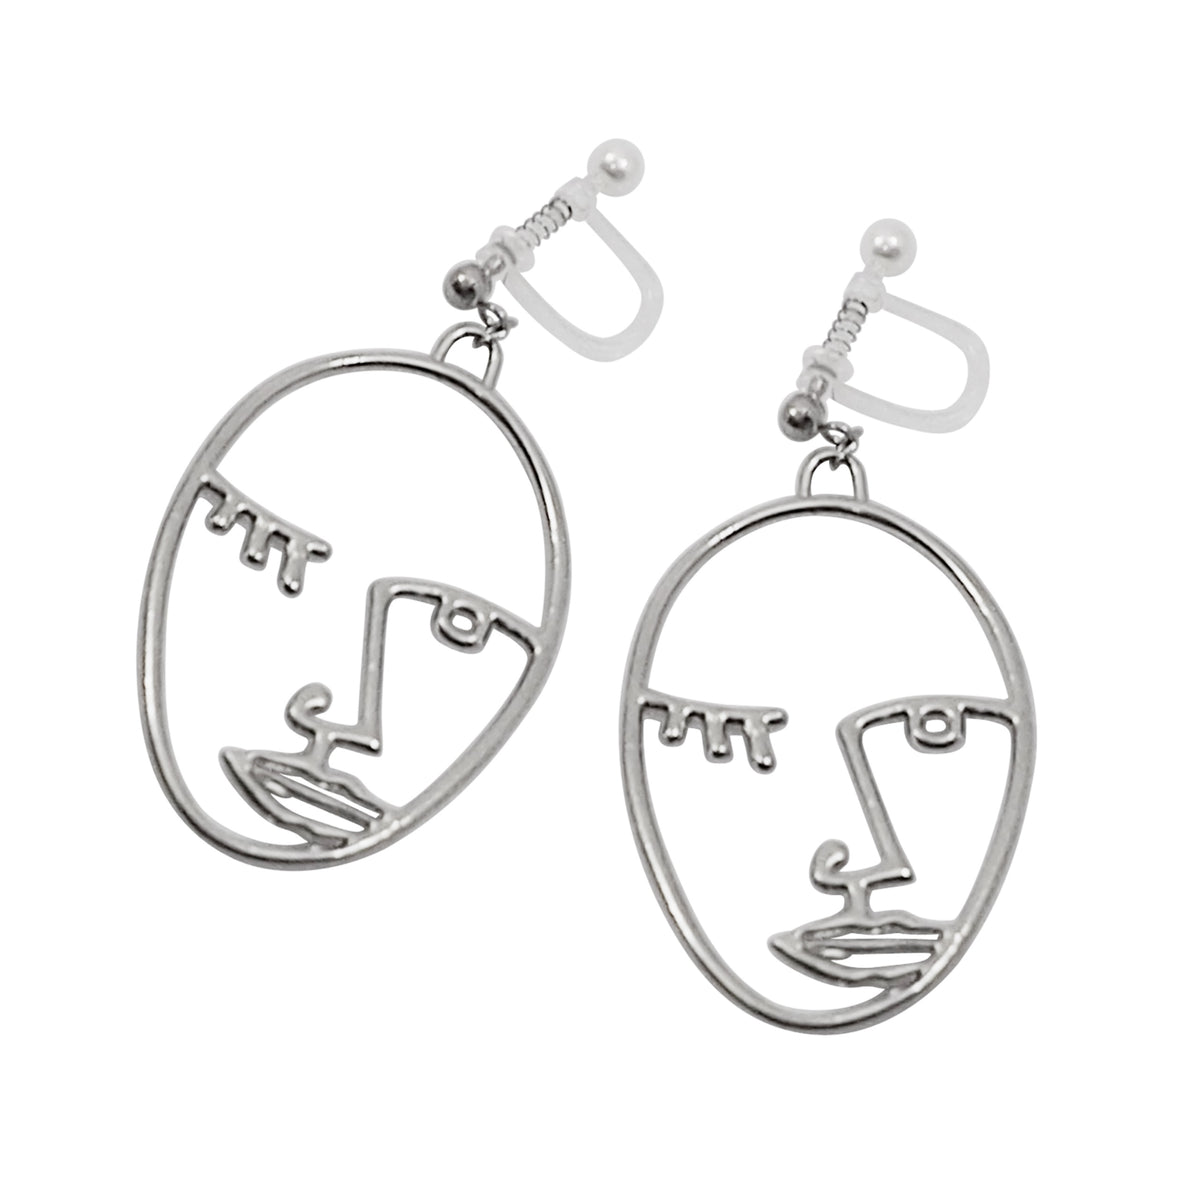 Earrings – Not Picasso